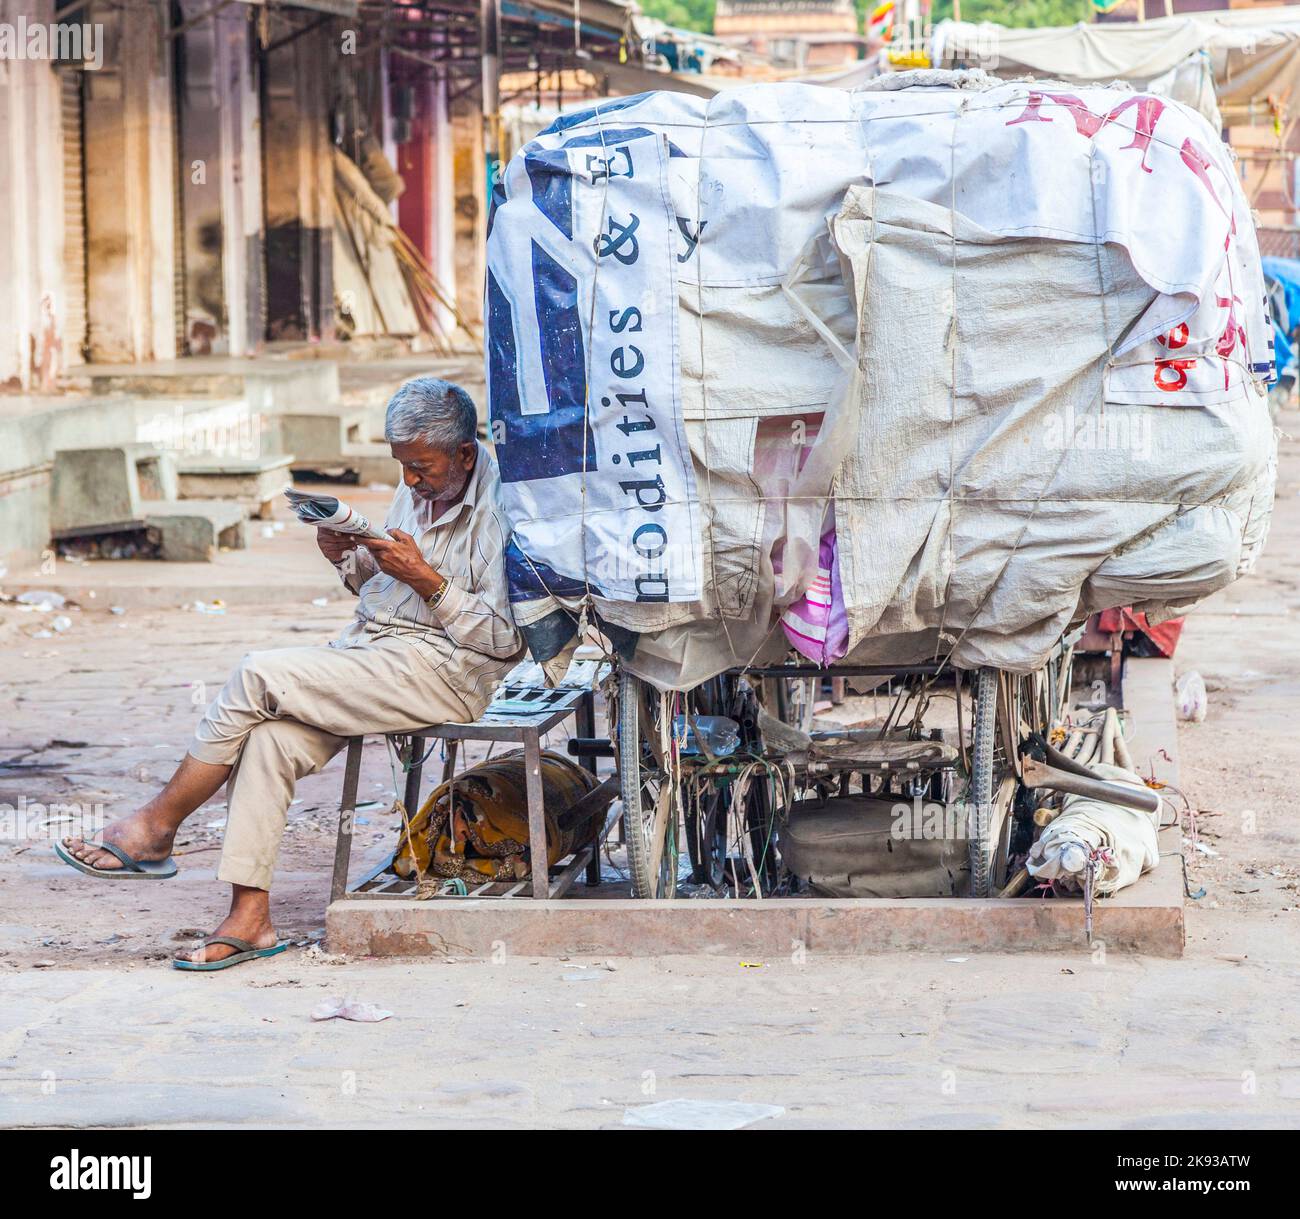 JODHPUR, INDIA - OCTOBER 23, 2012: man rests in his Cycle rickshaw  in Jaipur, India. Cycle rickshaws were introduced in the 1940's and have a fixed q Stock Photo